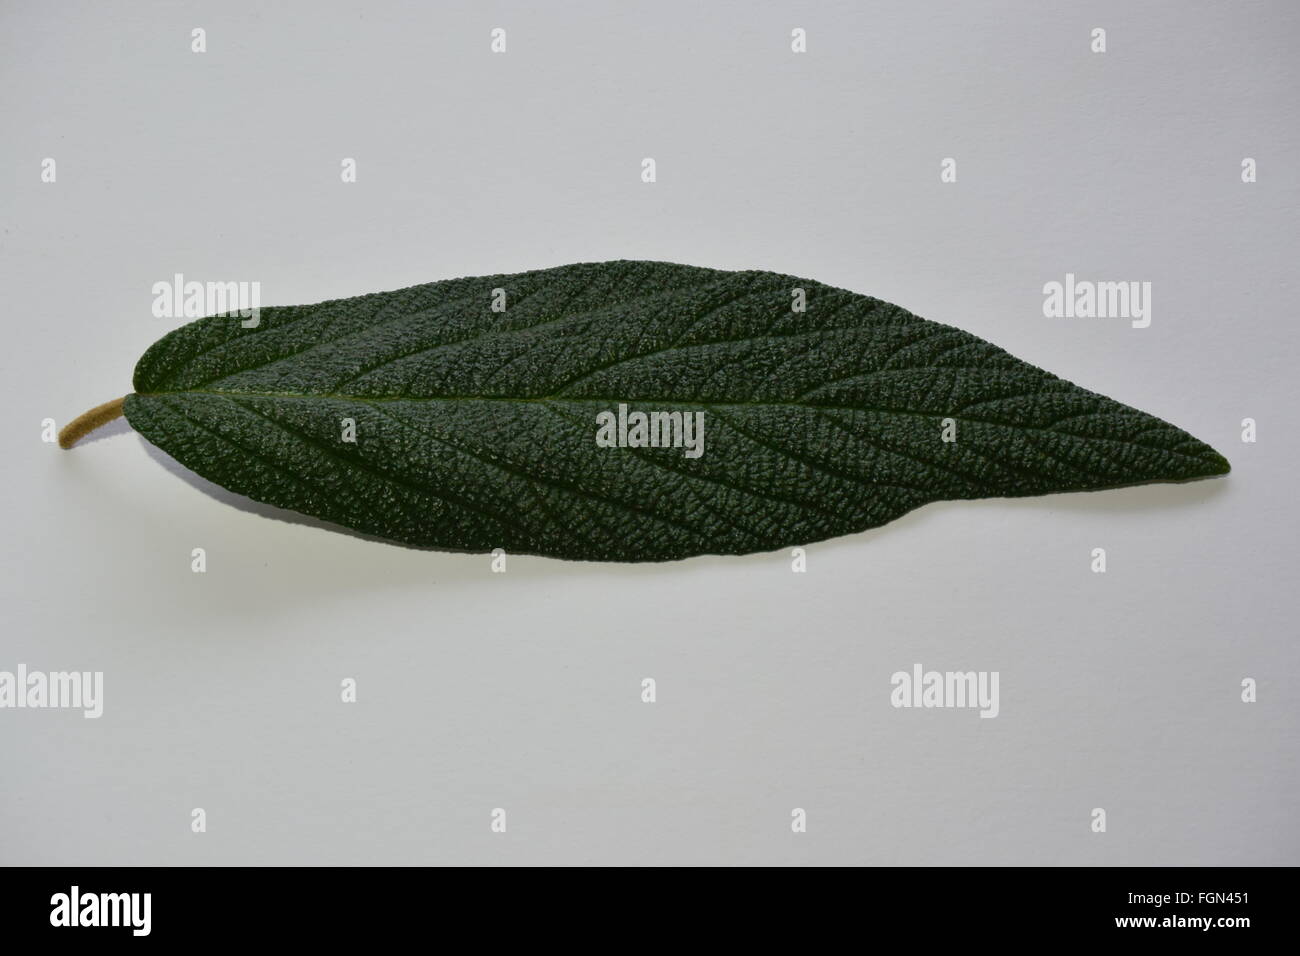 green leaf on a table Stock Photo